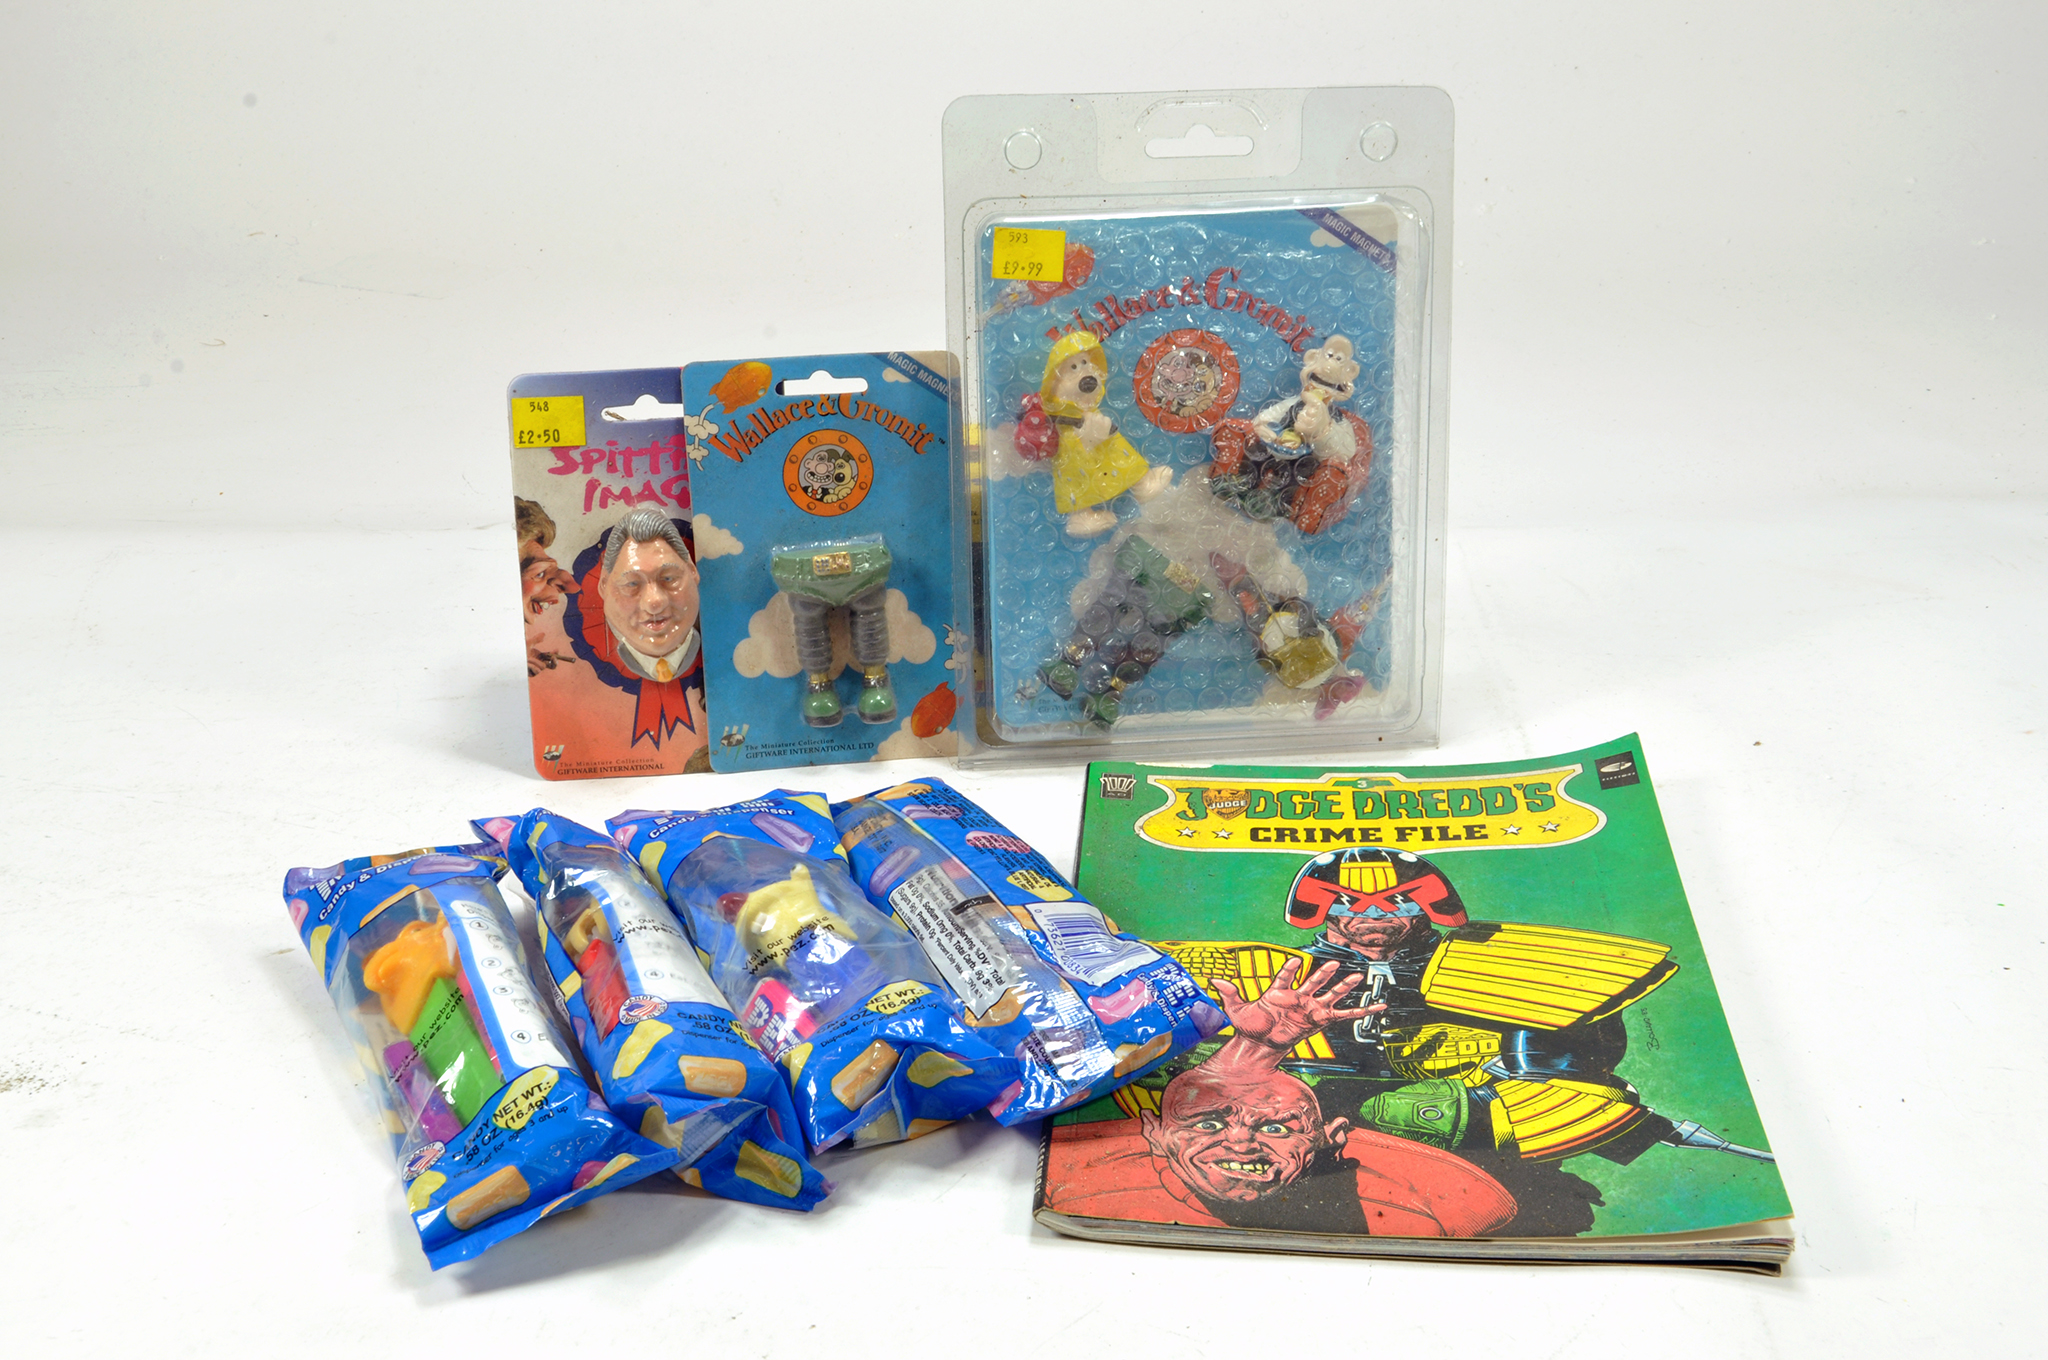 Novelty Toy group including Wallace and Gromit, Judge Dredd Comic and other items.